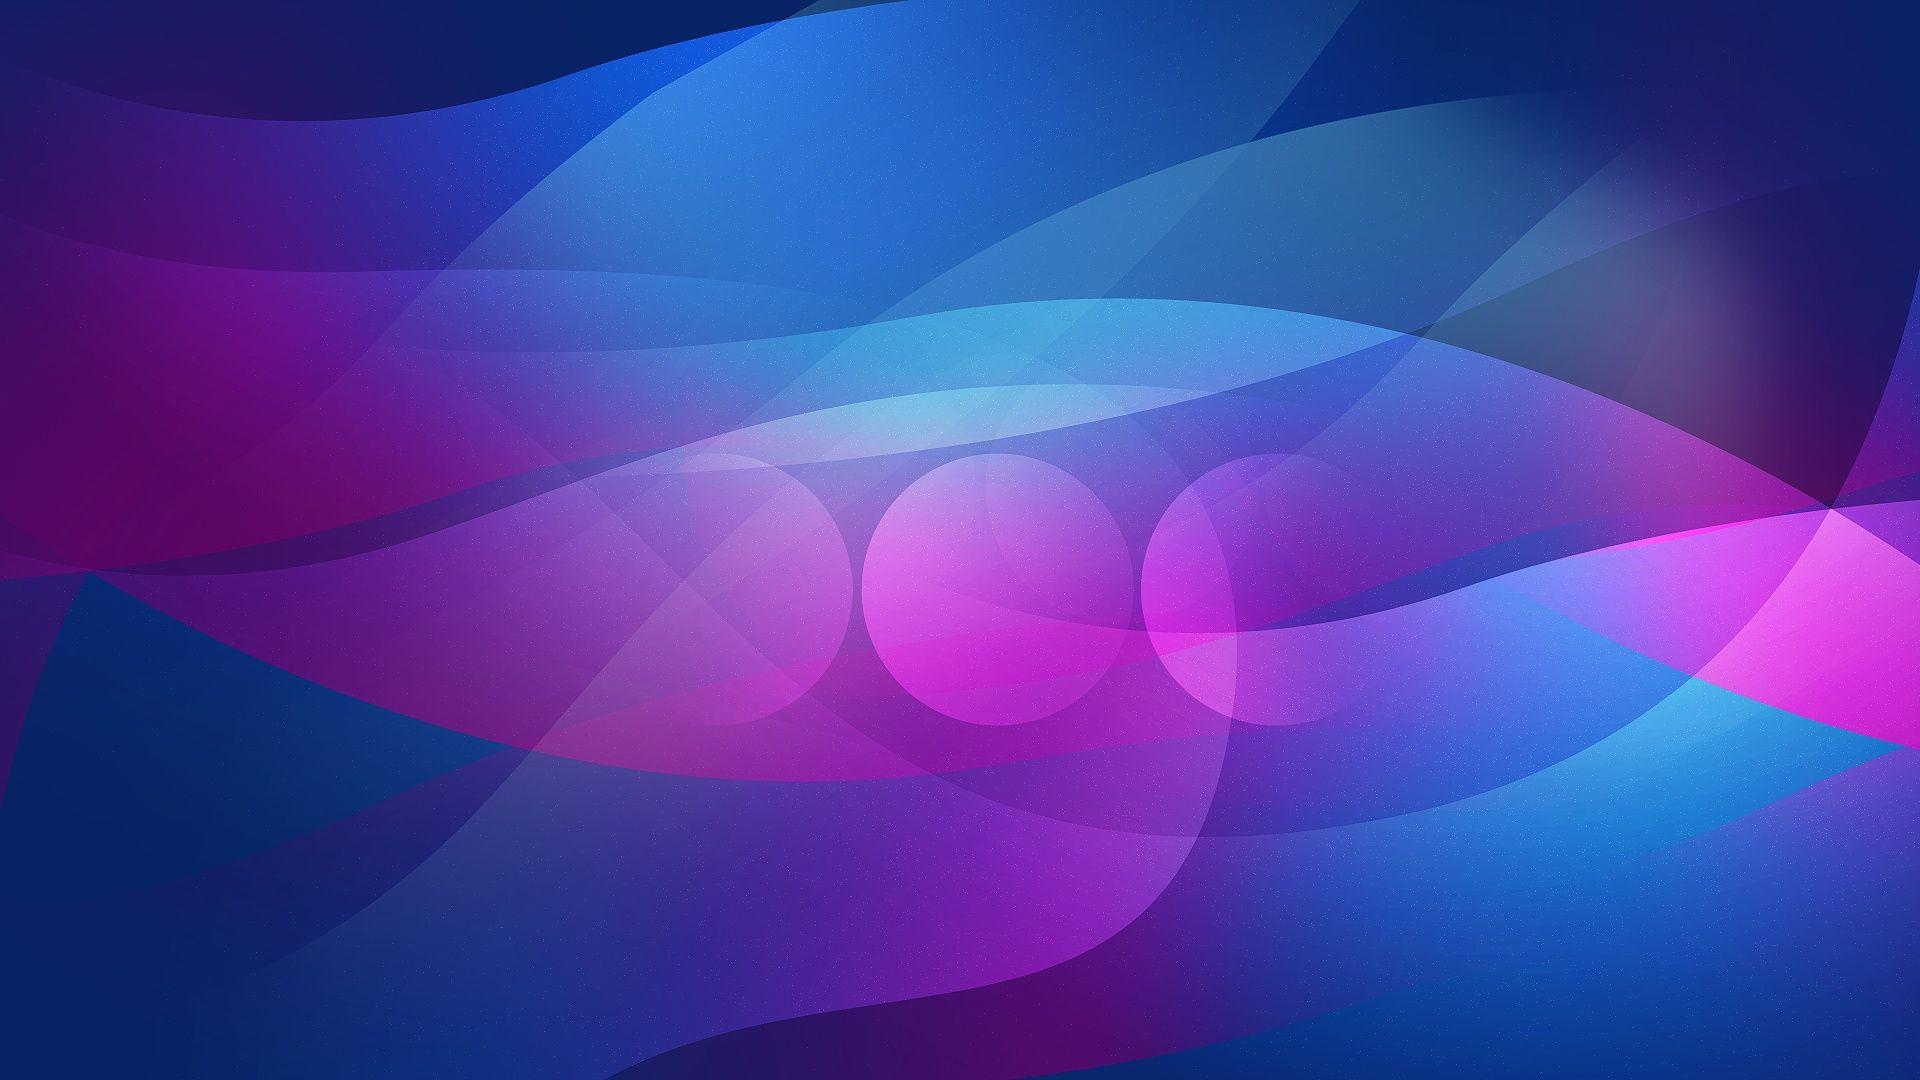 Wallpaper for Gt Purple Abstract Background Image 1920x1080PX